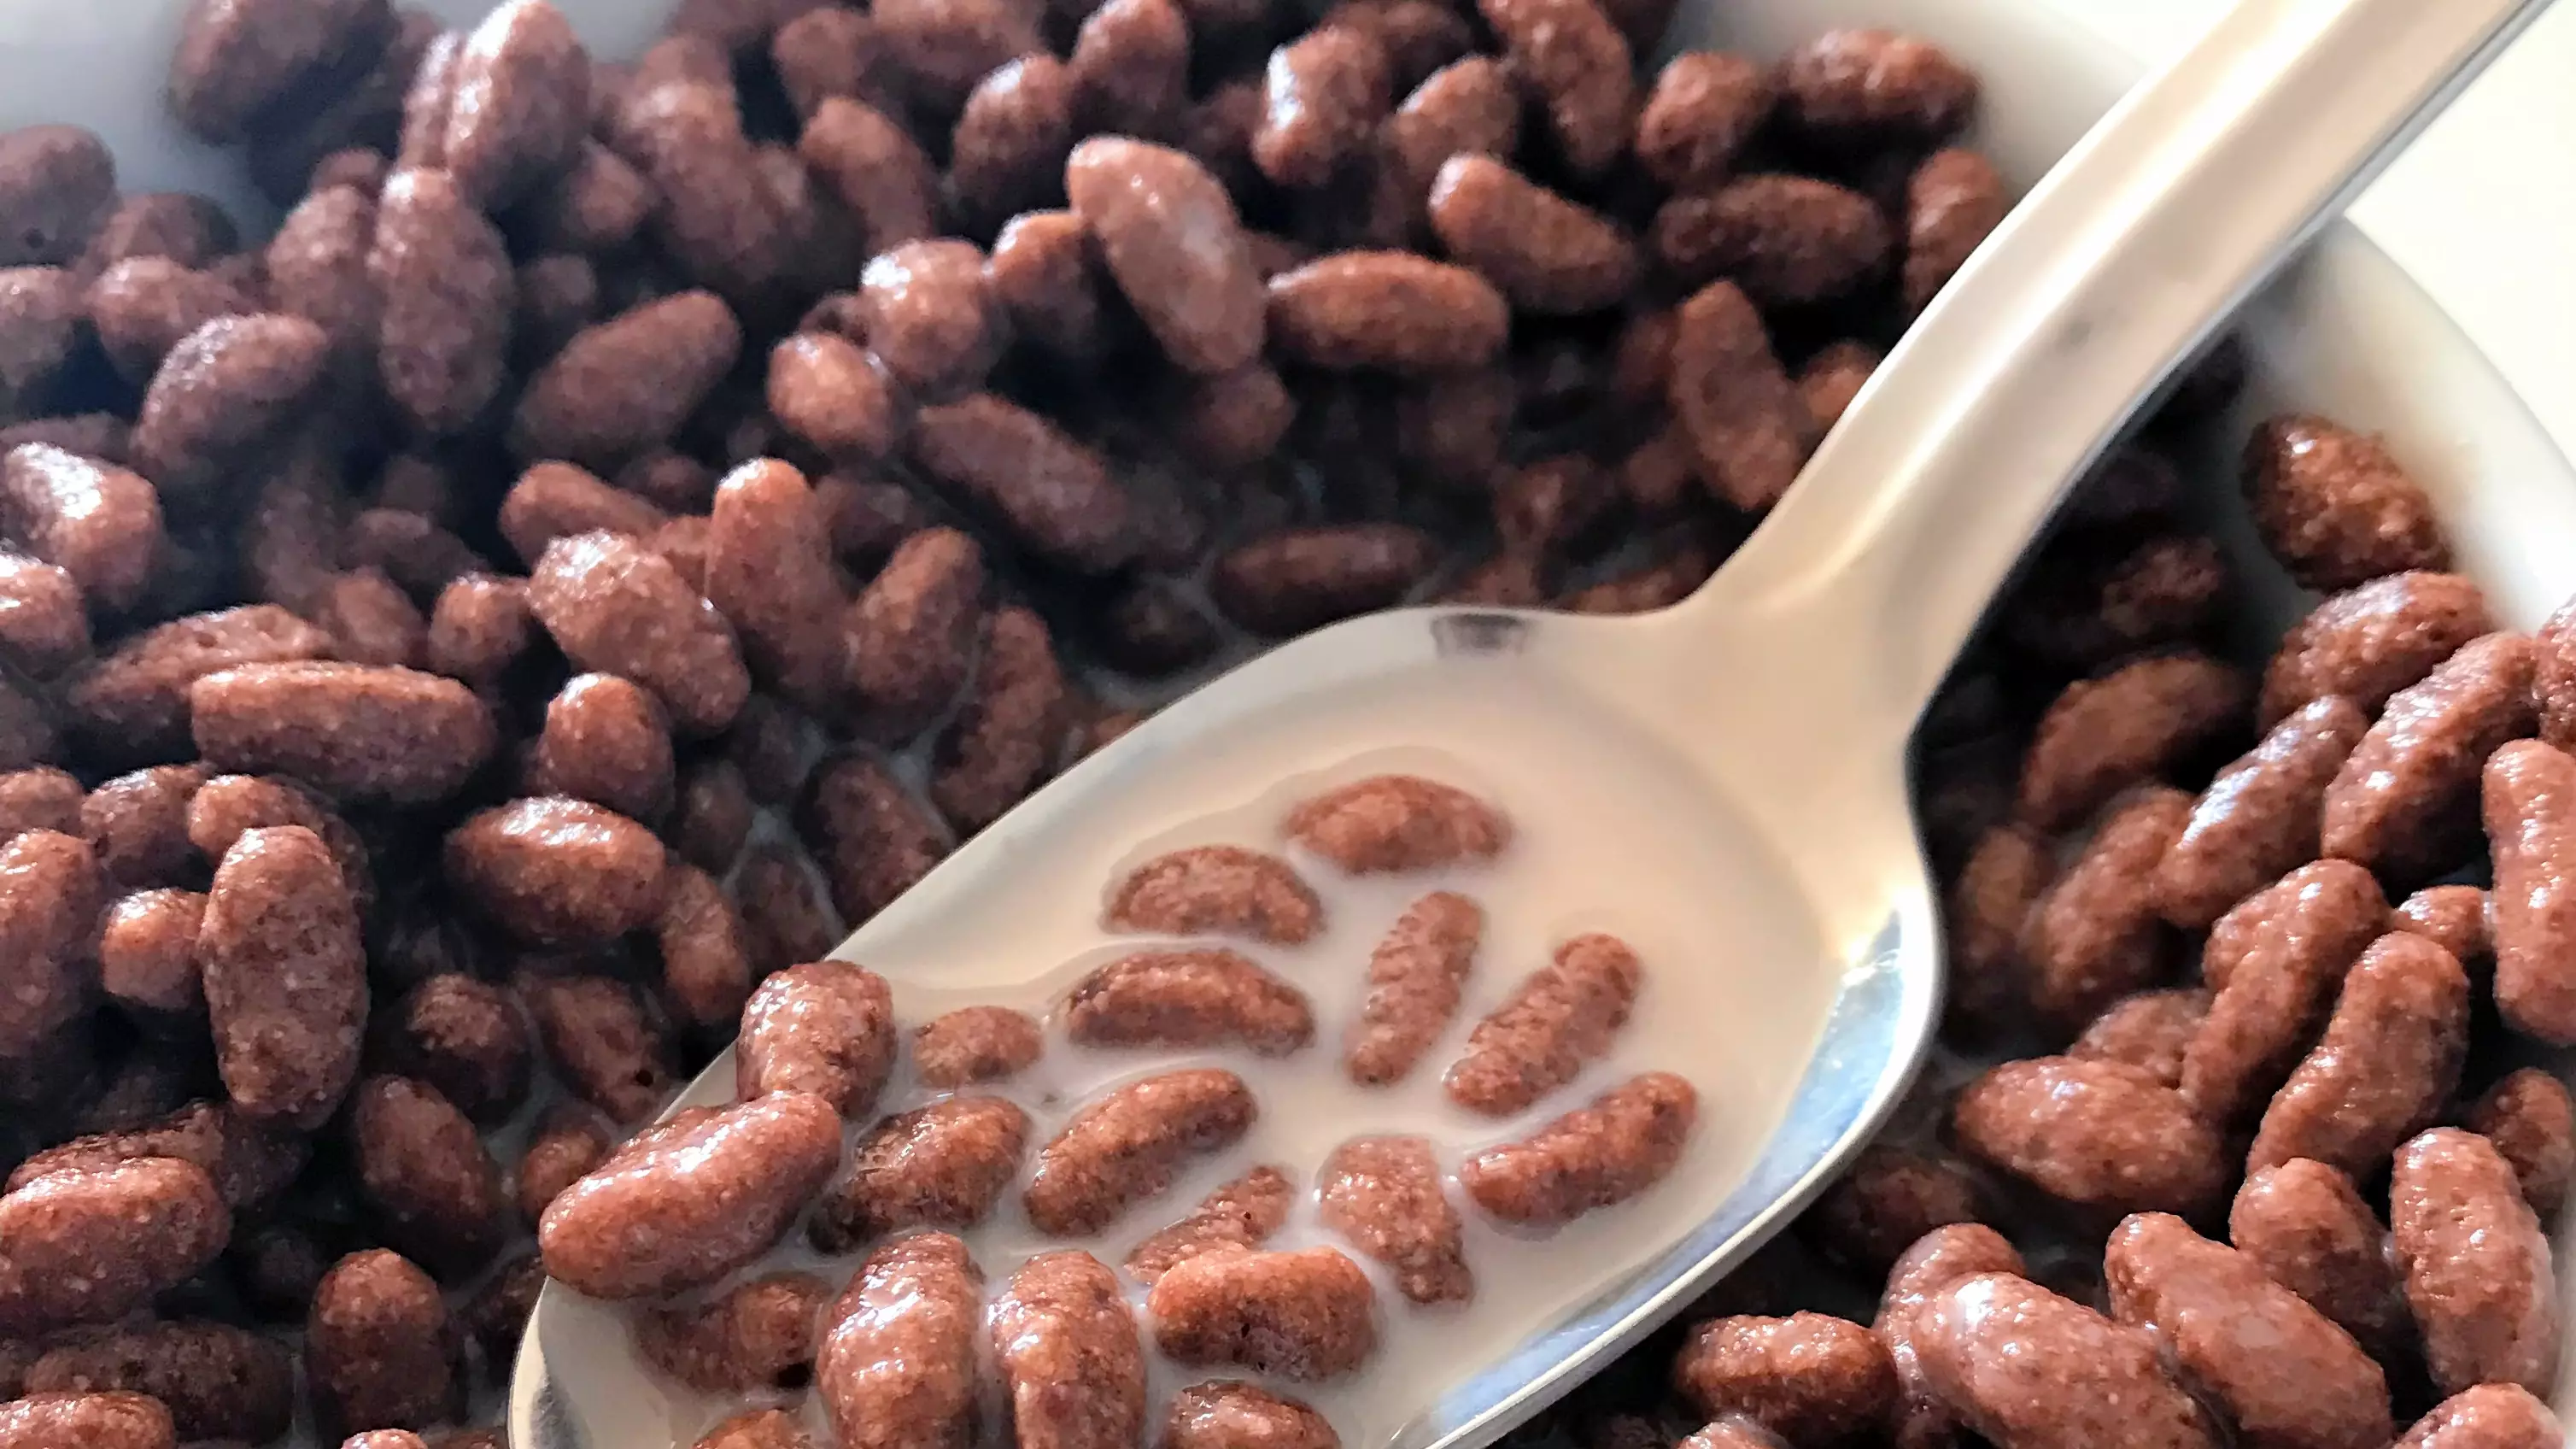 Mum Horrified After Finding Weight Loss Pill In Son’s Coco Pops Cereal 